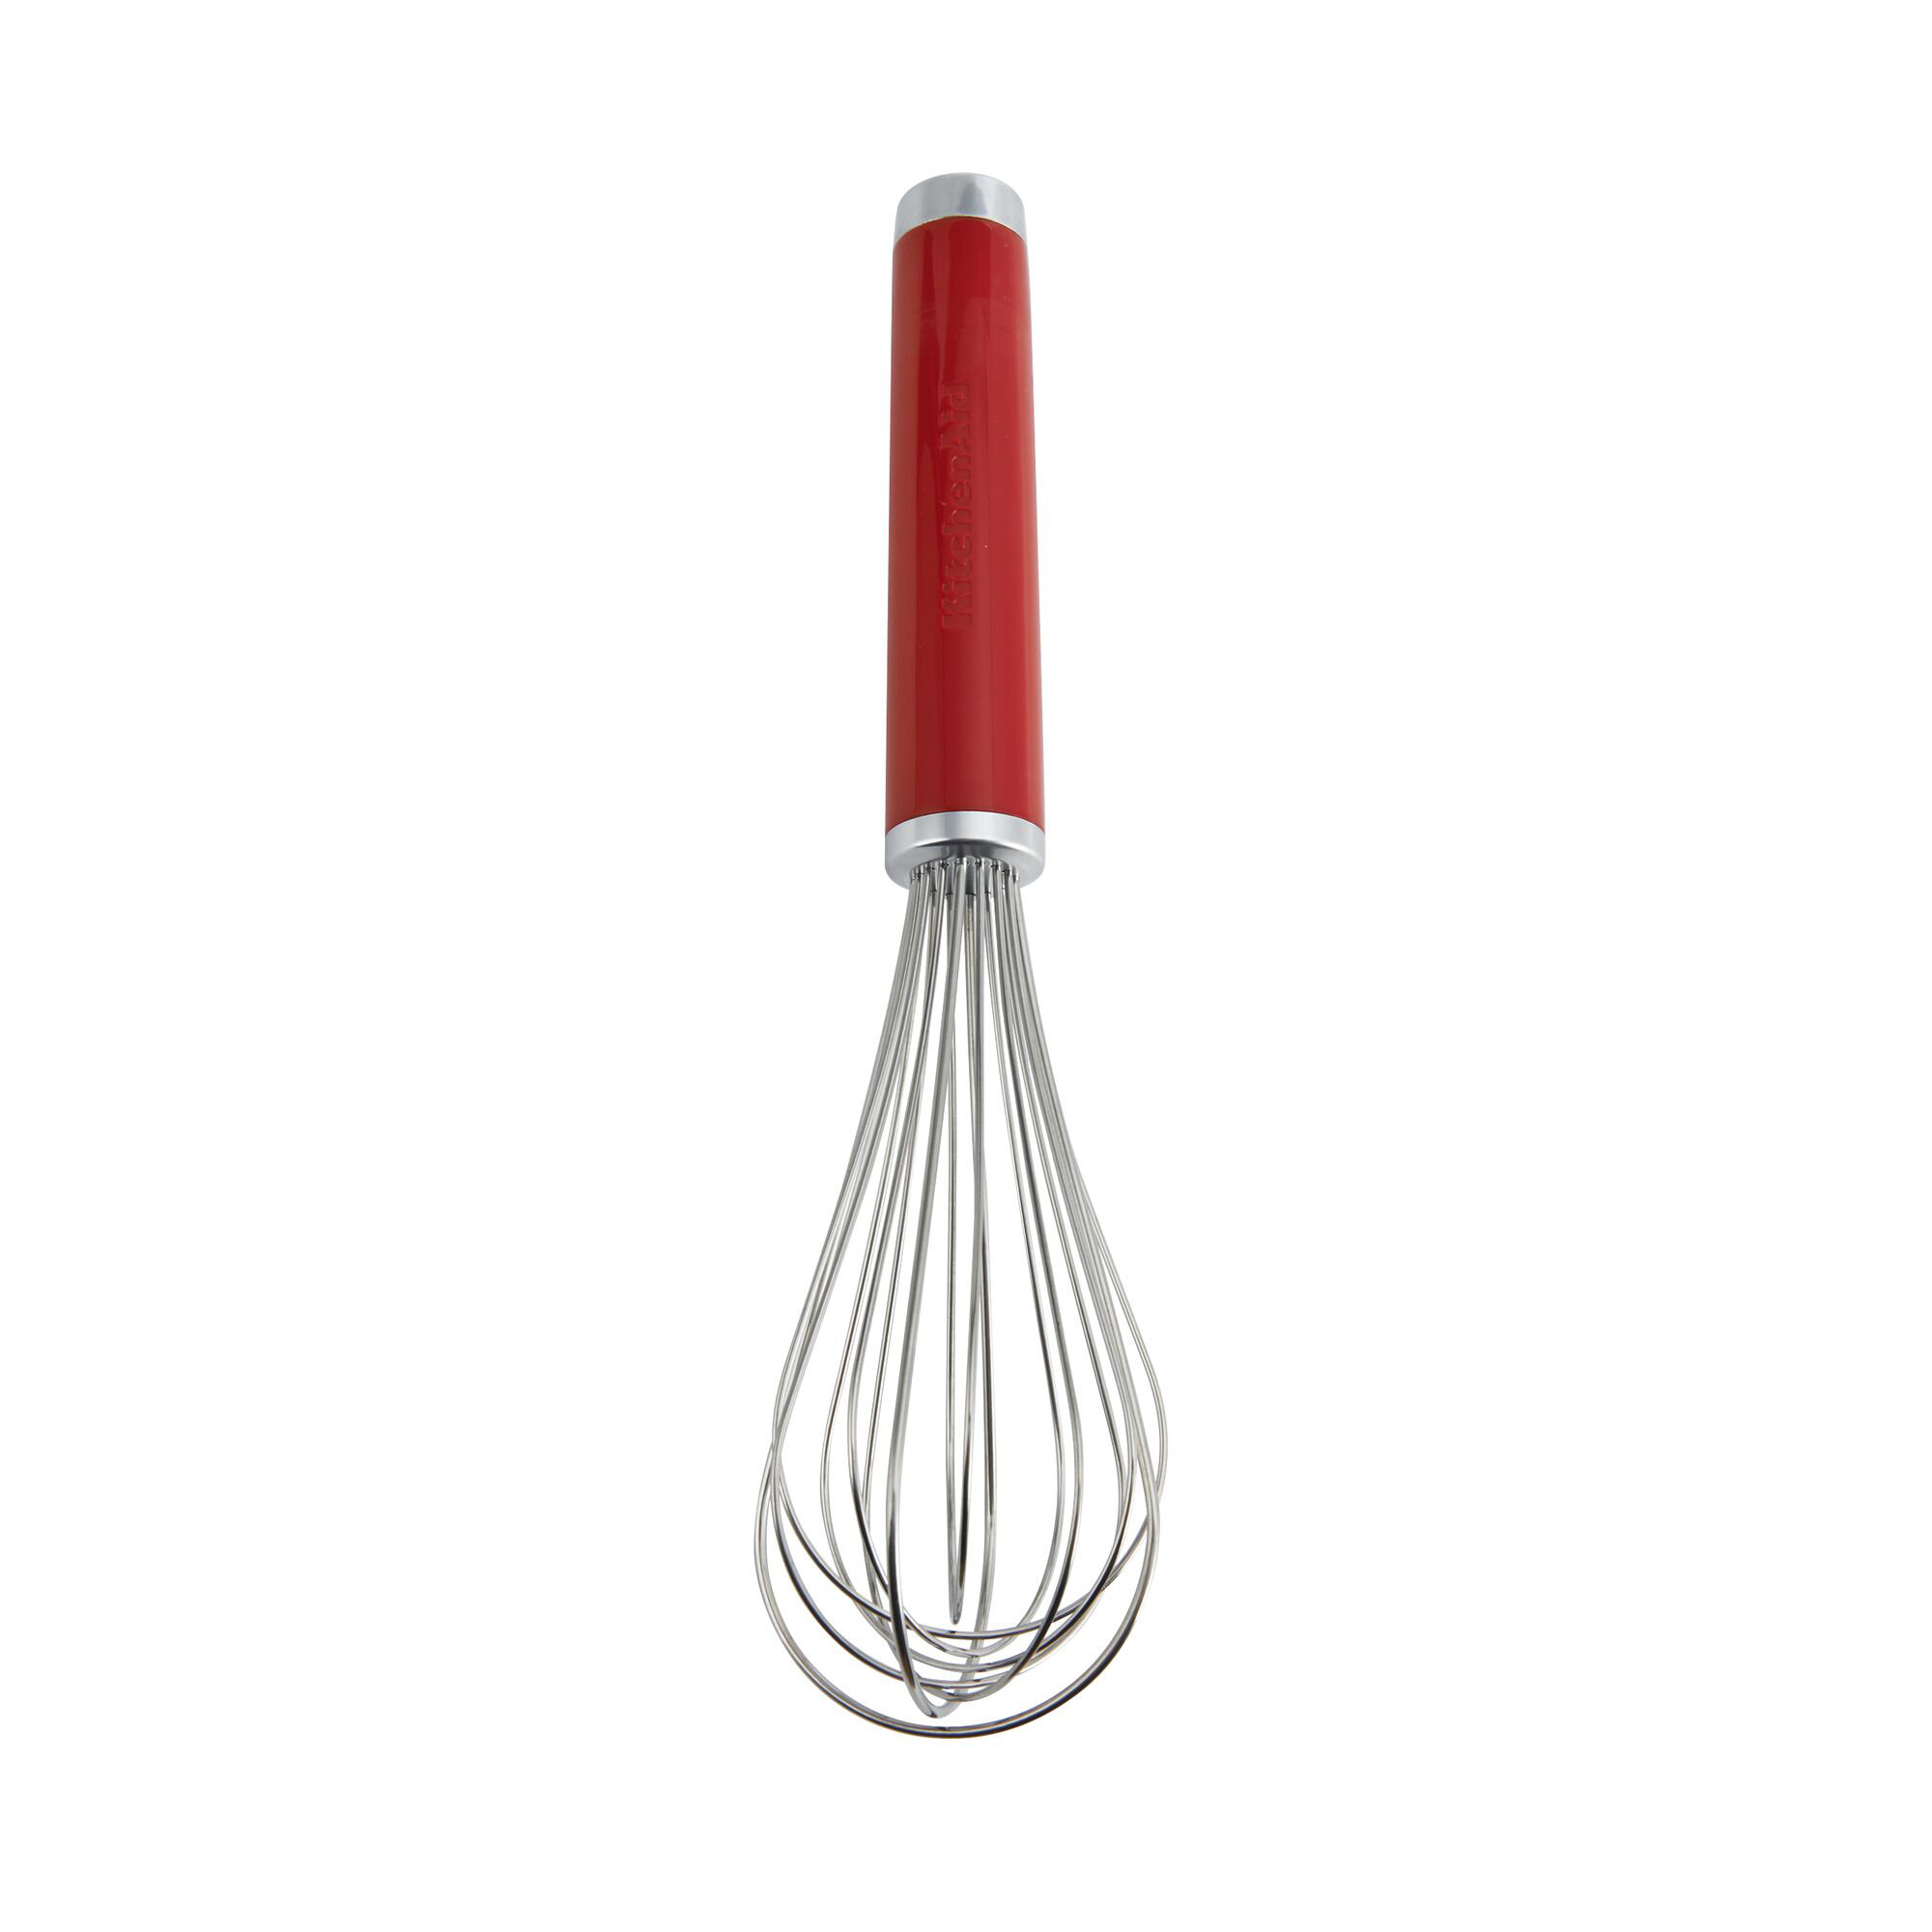 Chef Craft Premium Silicone Wire Cooking Whisk, 10.5 inch, Red 